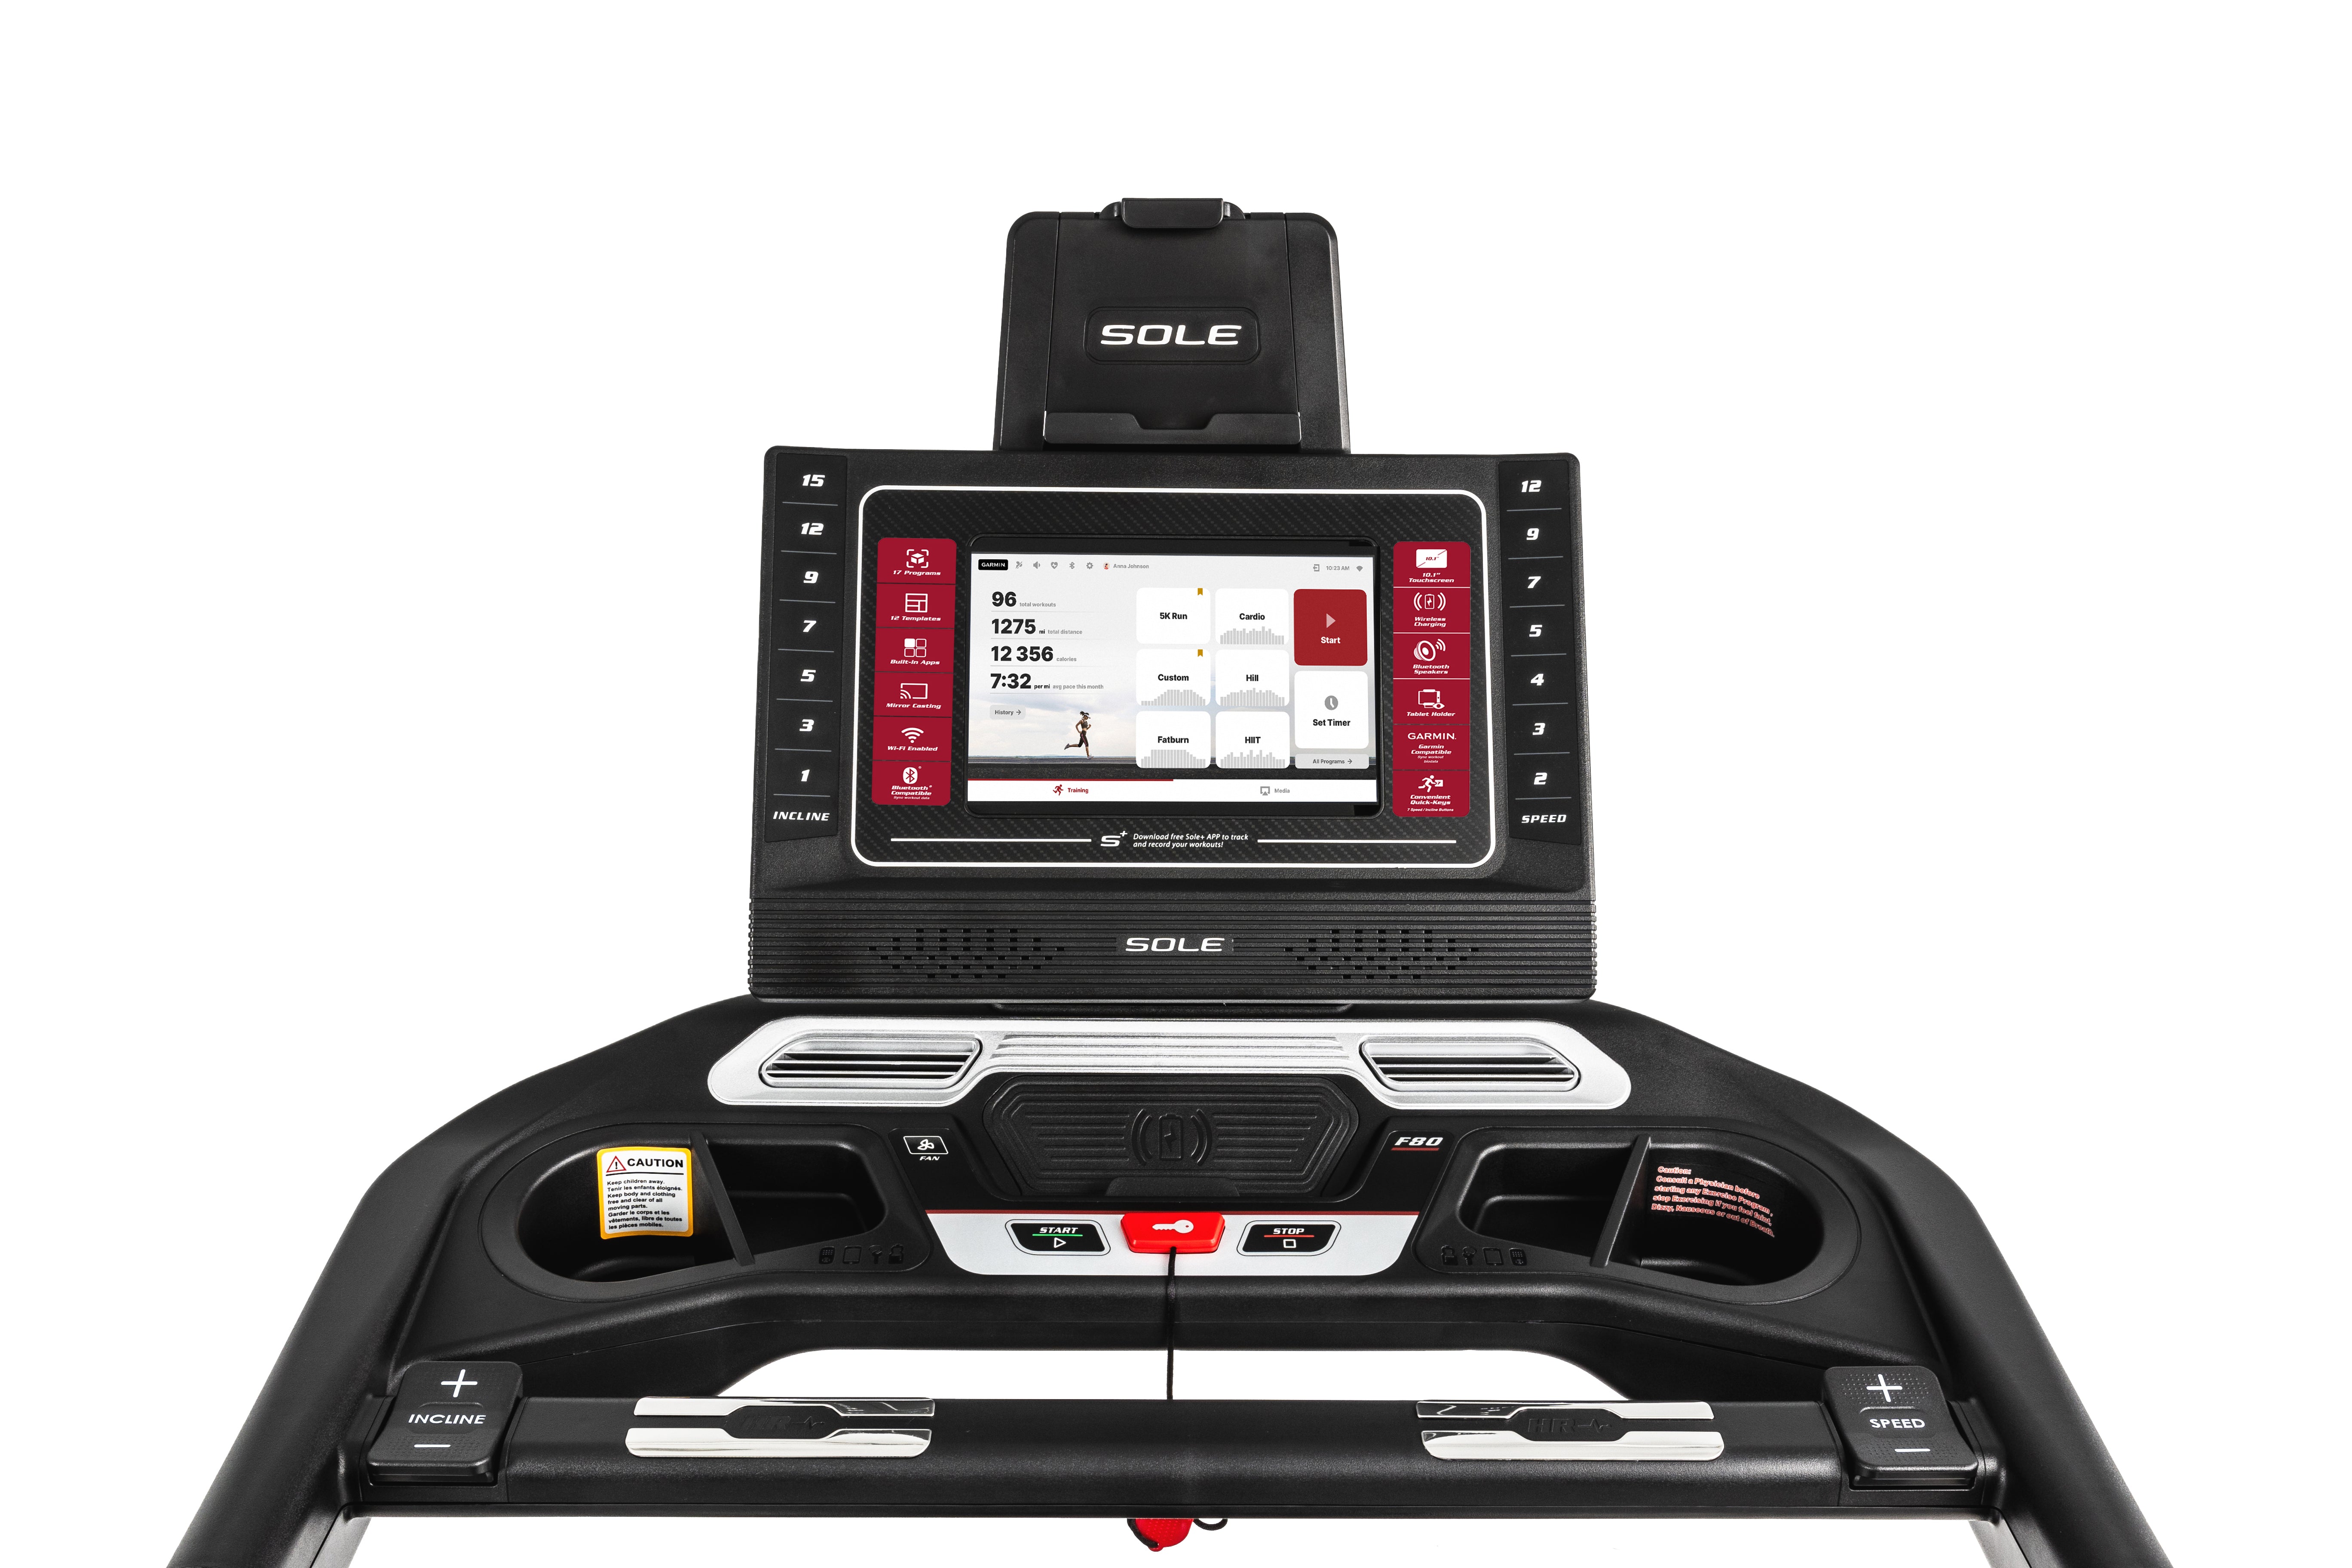 Front view of the Sole F80 treadmill's console featuring a large digital display with workout metrics, a tablet holder with the 'SOLE' branding, and user-friendly control buttons for speed and incline adjustments.